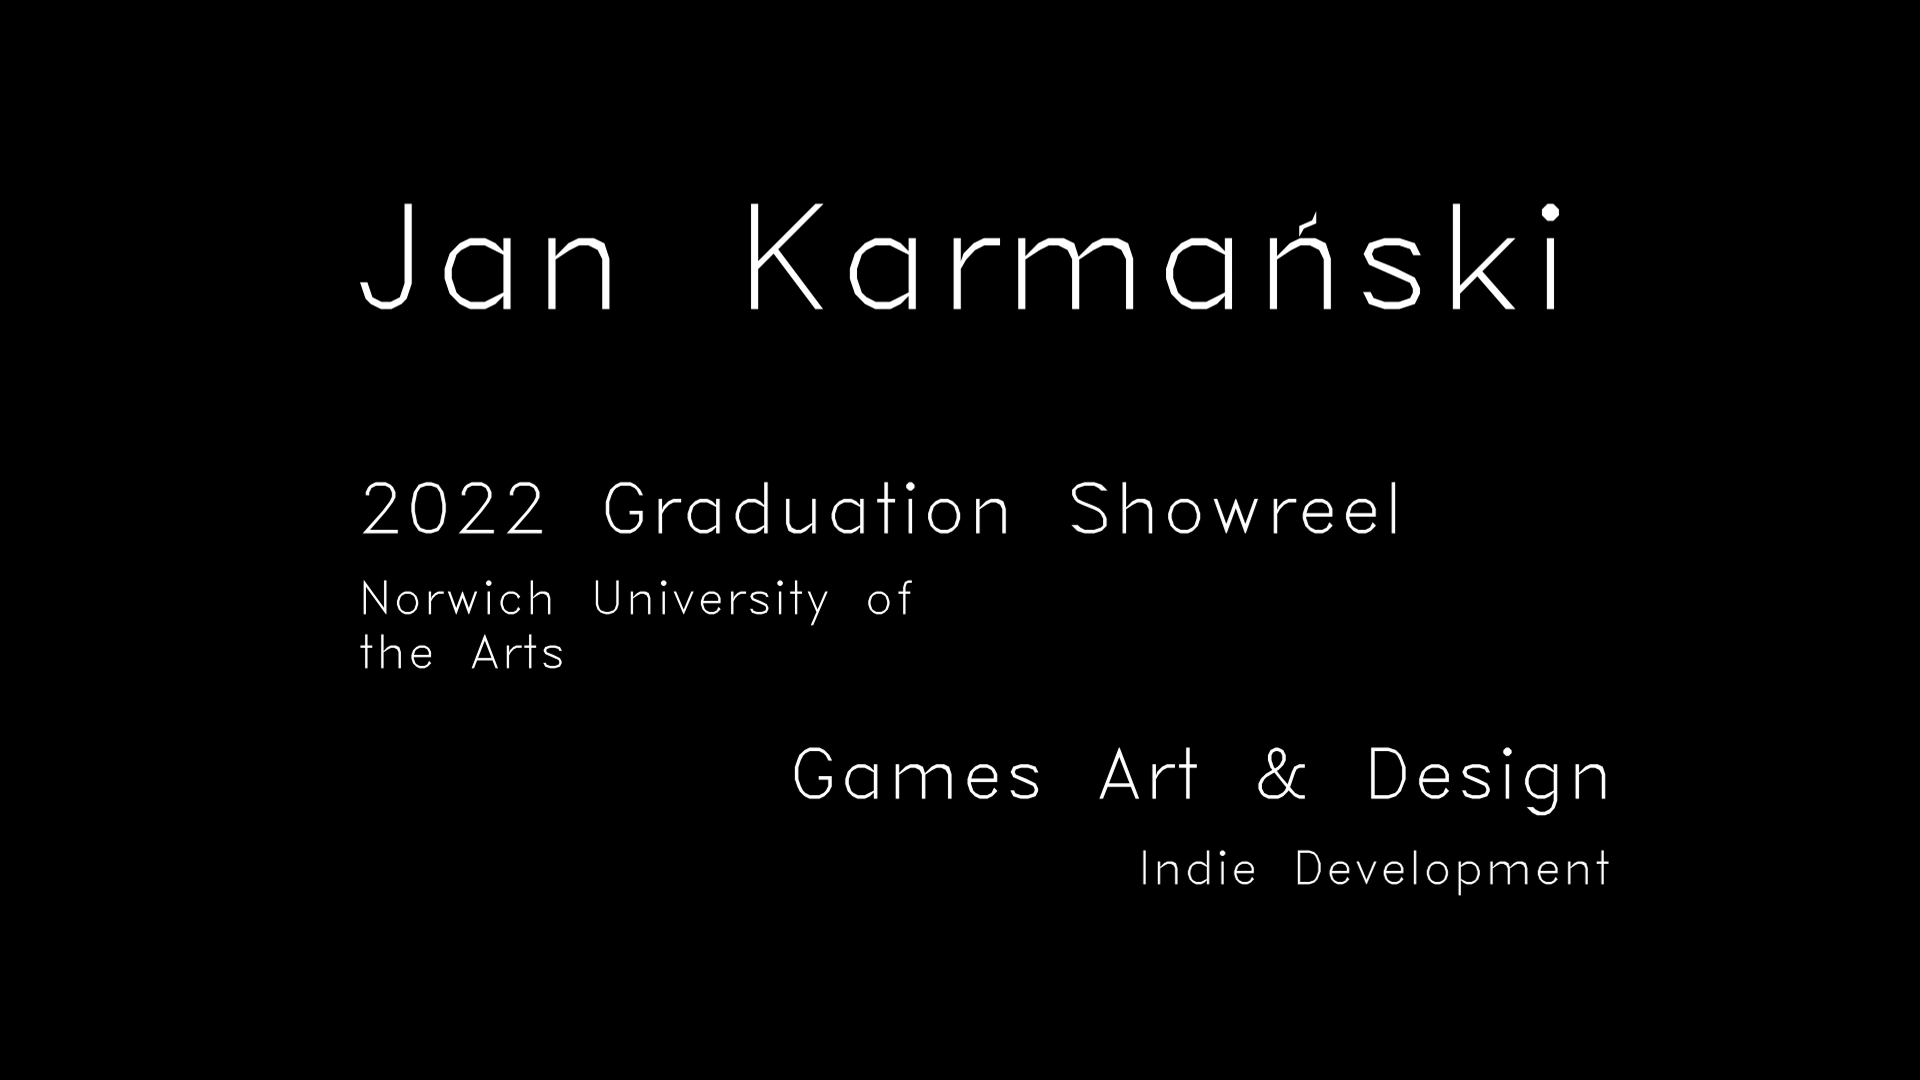 A showreel video showcasing various BA Games Art and Design game projects developed by Karmański.